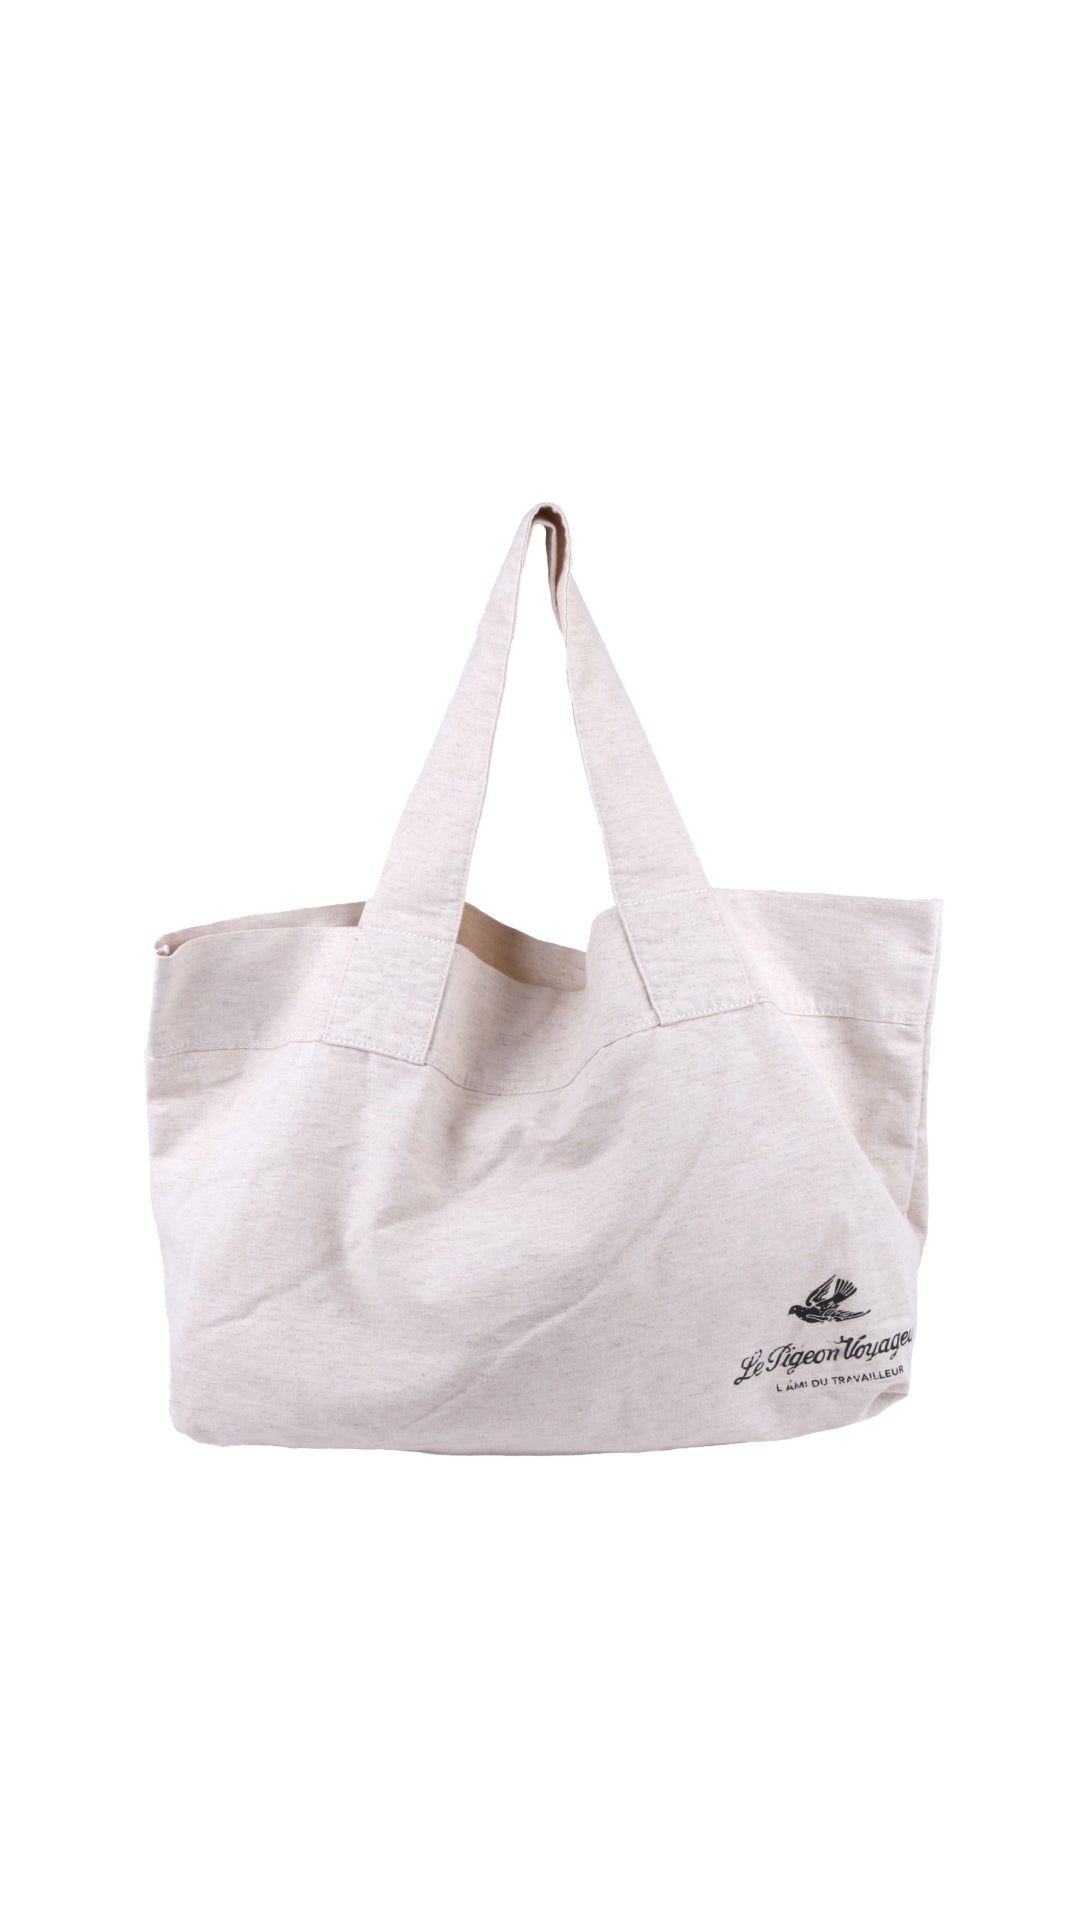 FRENCH LINEN TOTE TOTE BAG